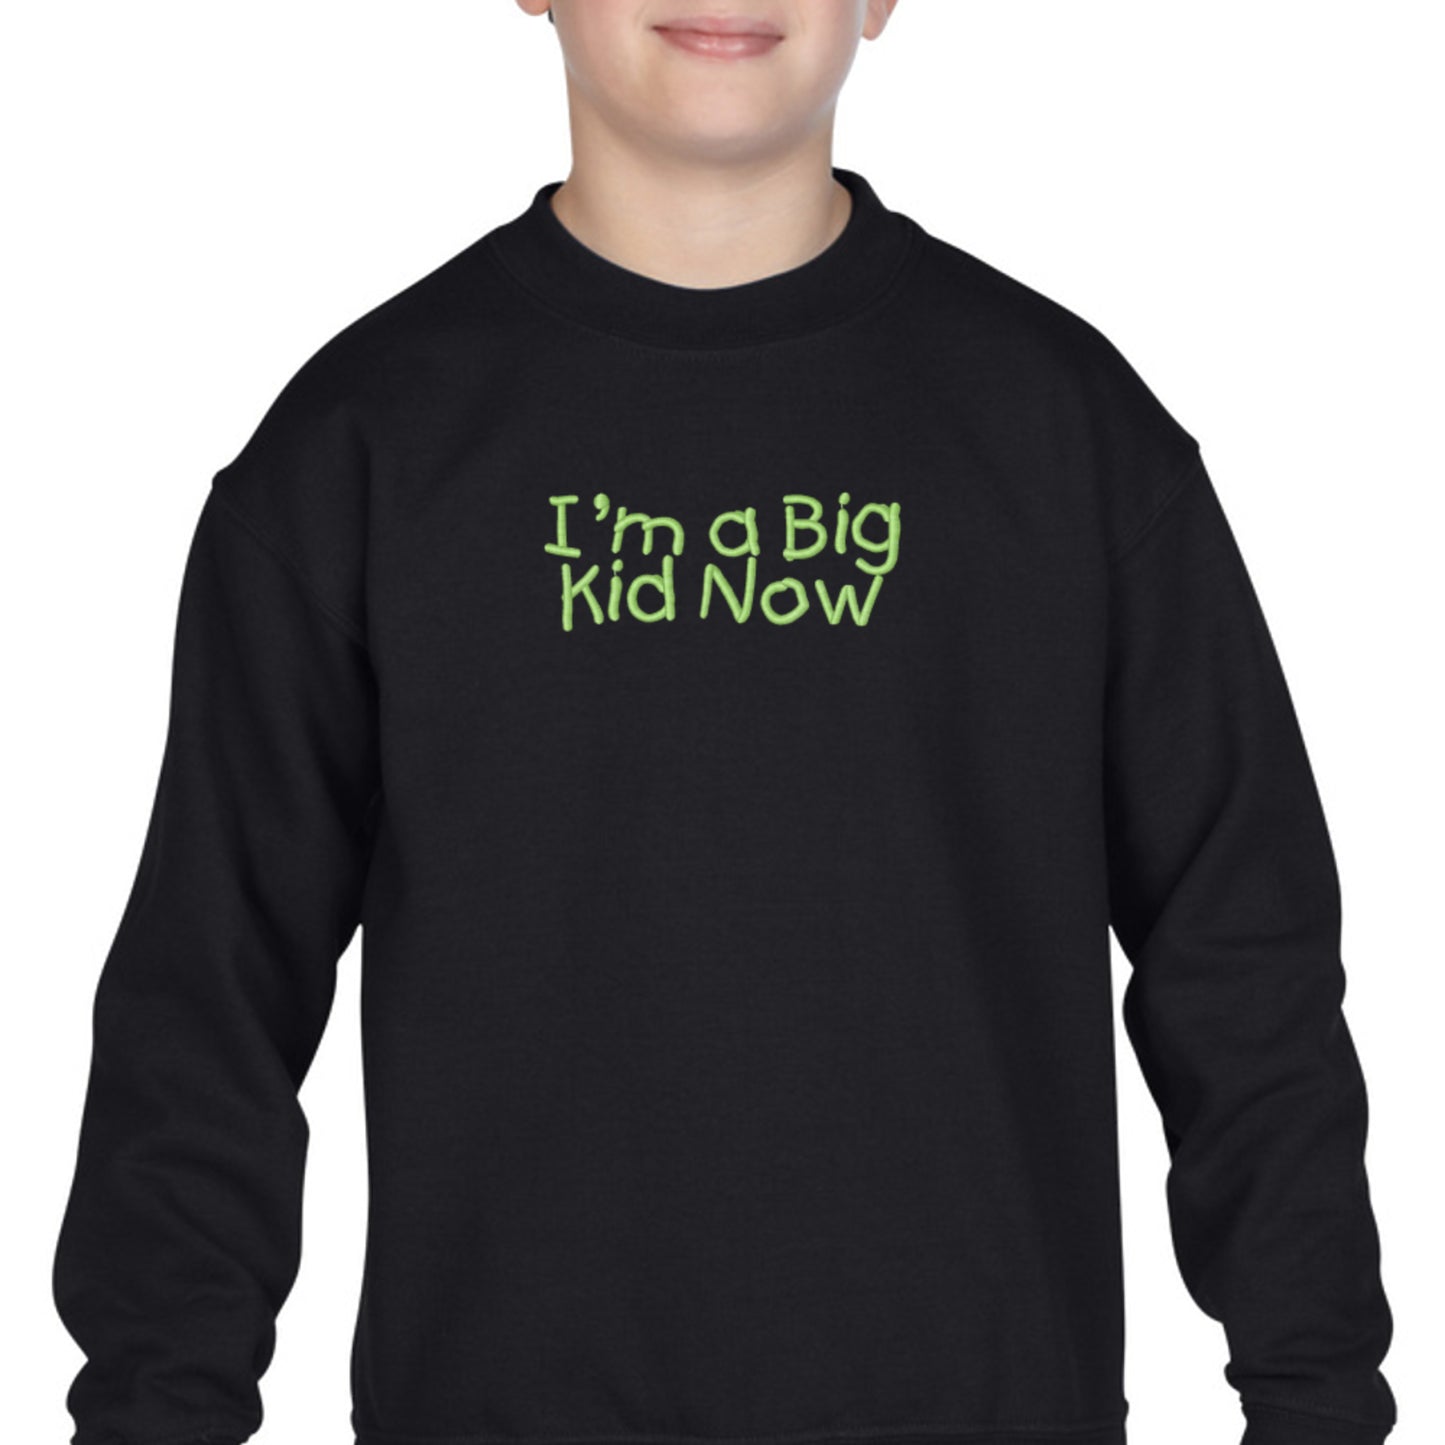 Youth Embroidered 'I'm a Big Kid Now" Hoodie or Crewneck. Long sleeve, Classic fit, Unisex